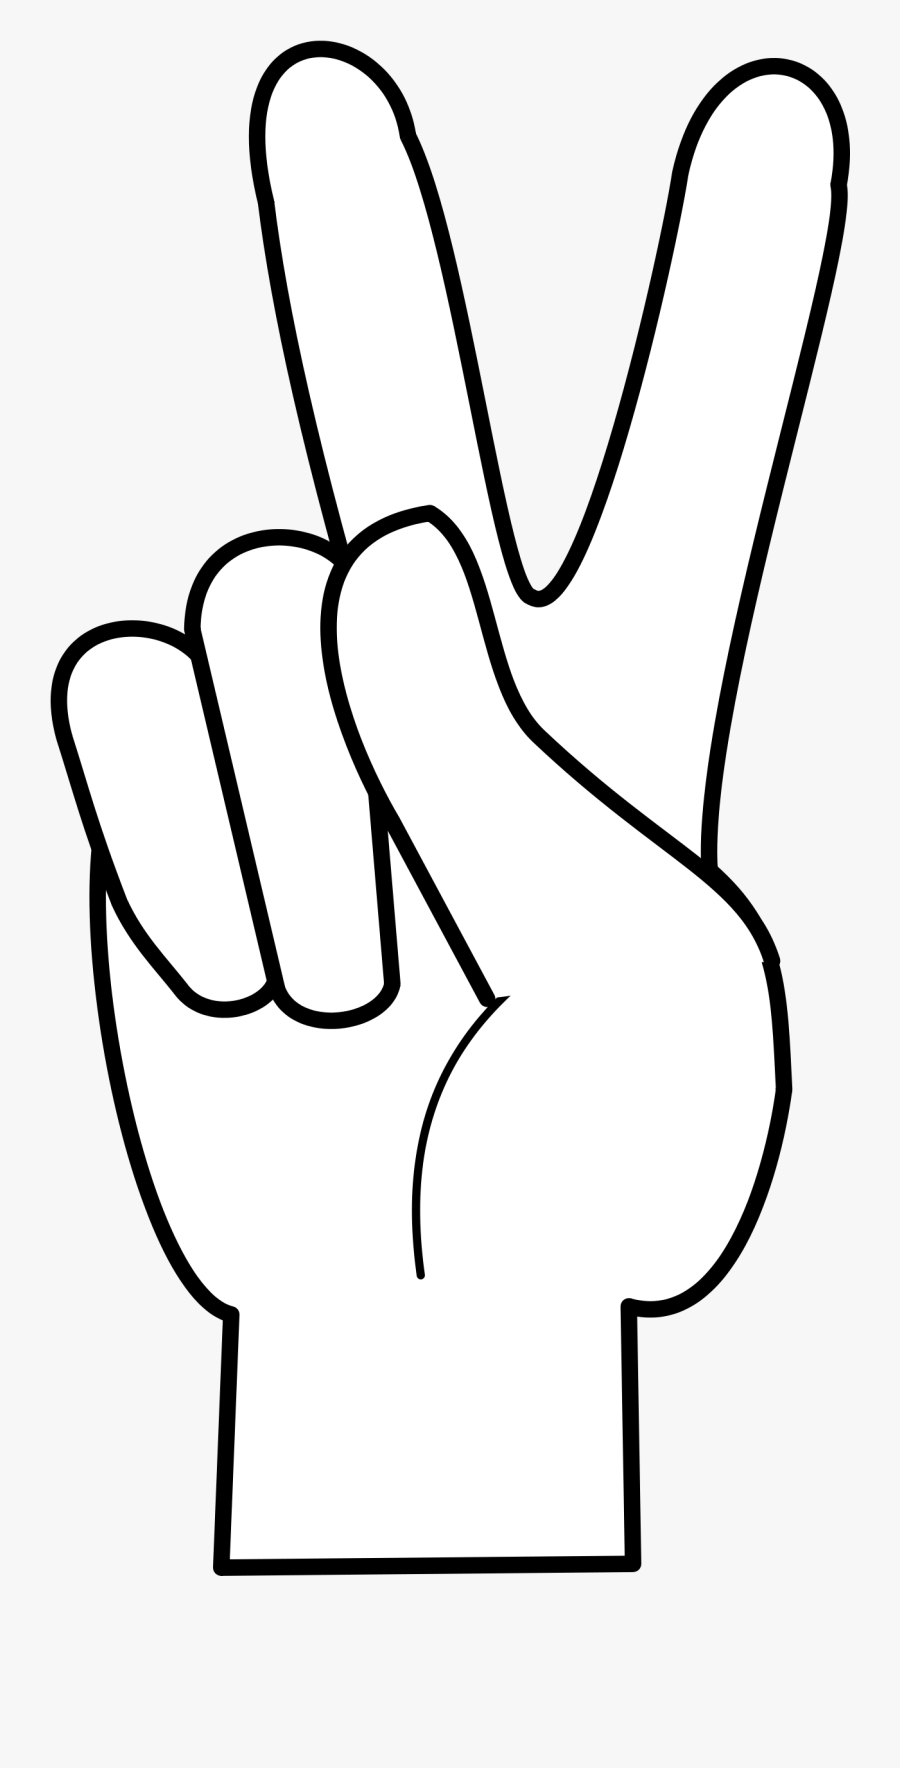 Hand Peace Sign Clipart - Animated Hand Peace Sign, Transparent Clipart